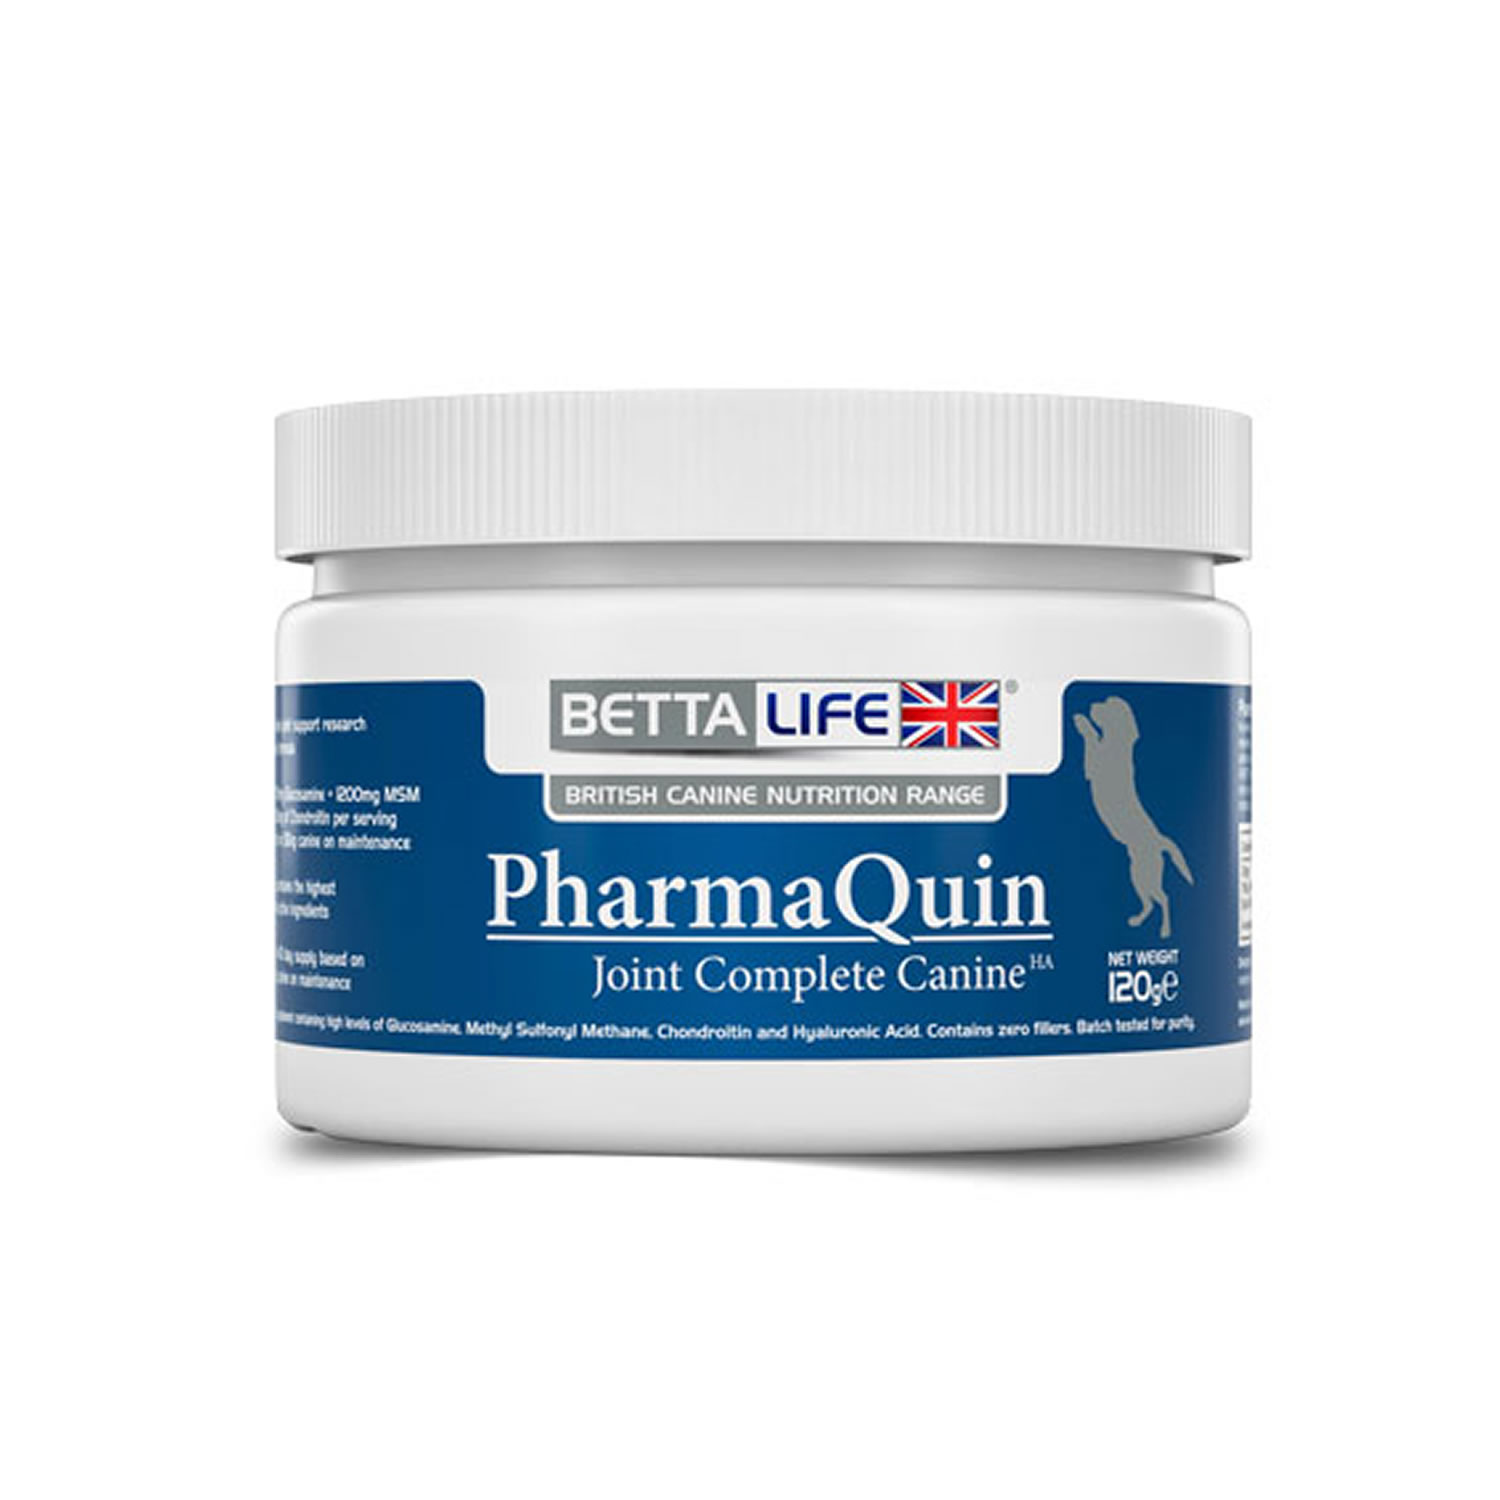 BETTALIFE PHARMAQUIN JOINT COMPLETE HA CANINE 120 GM